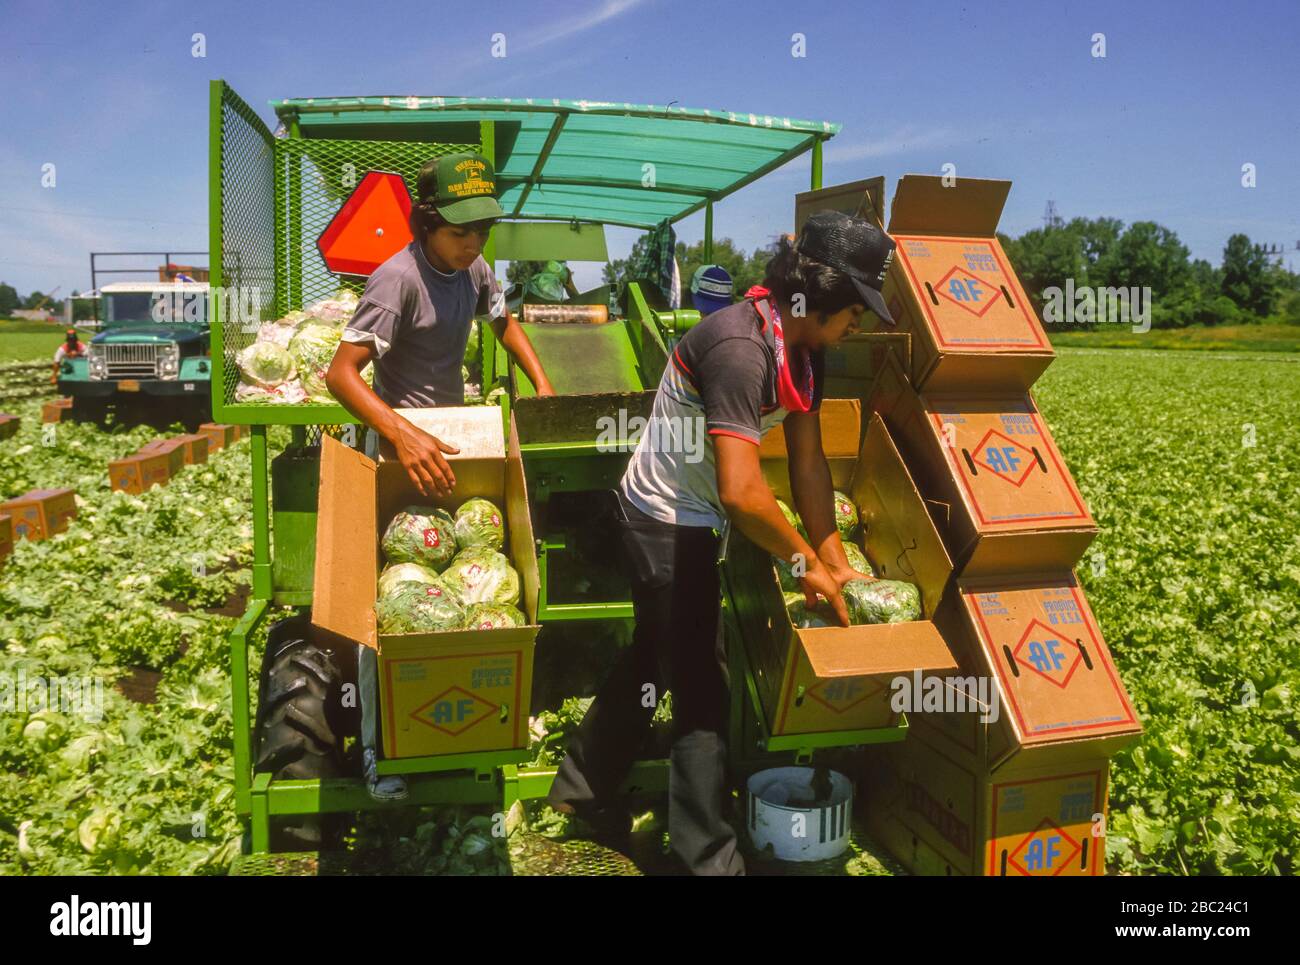 OSWEGO COUNTY, NEW YORK, USA, JULY 1985 - Migrant workers harvest lettuce in muck fields. Stock Photo